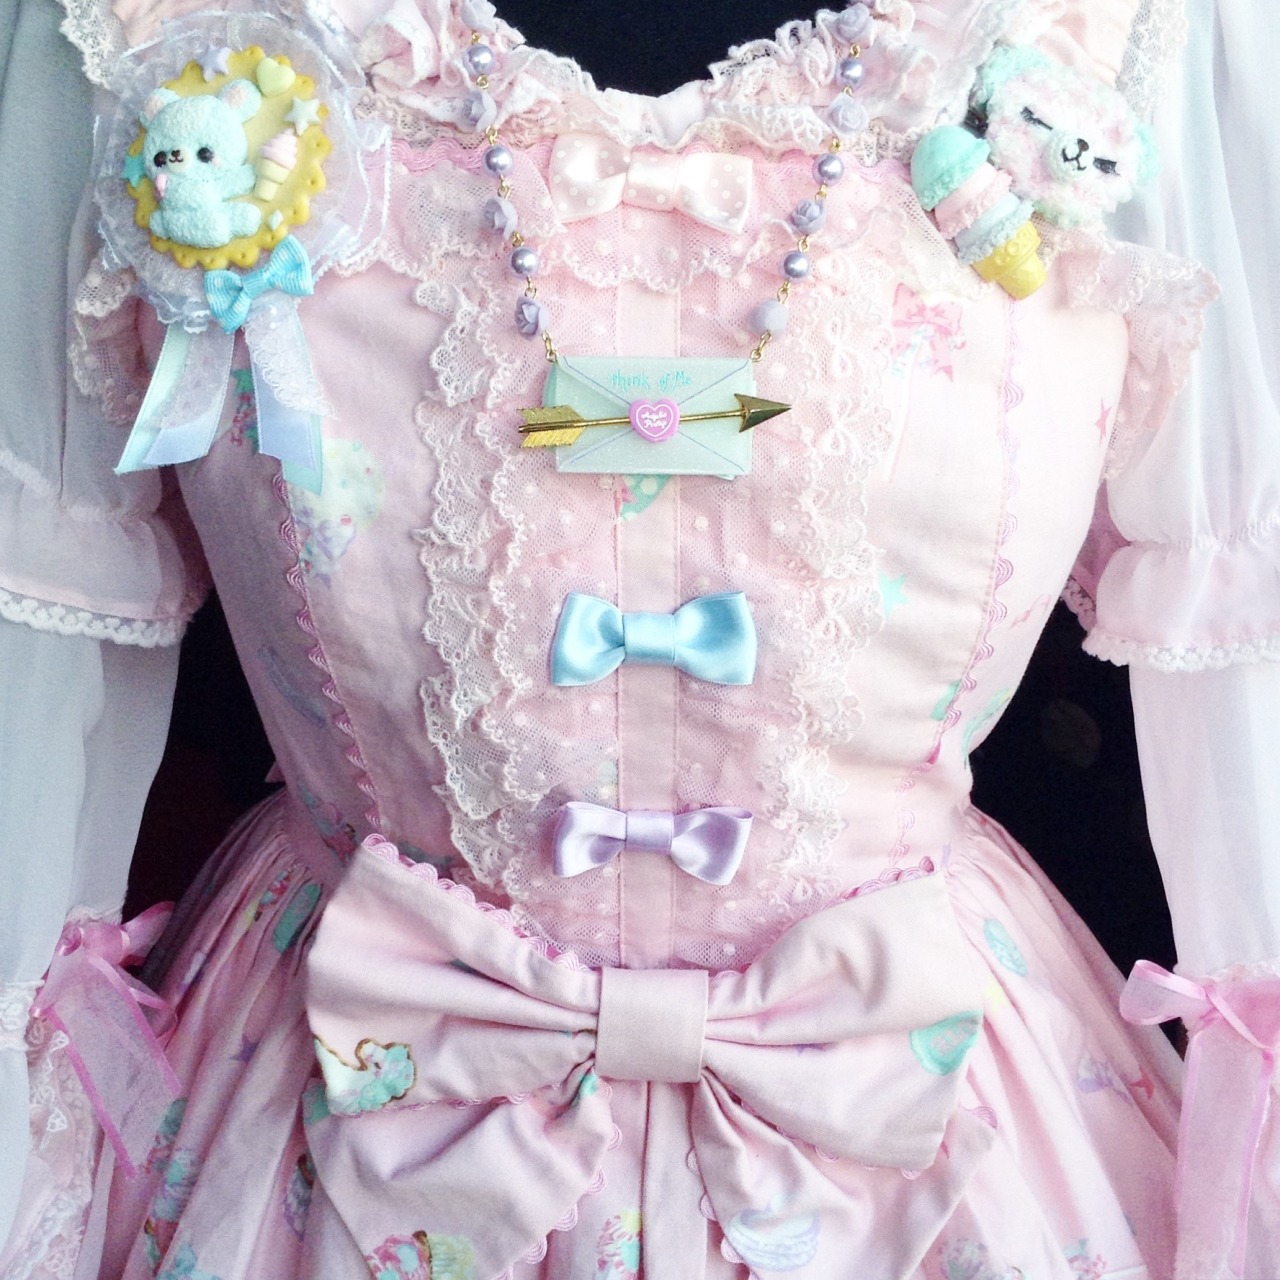 Once Upon a Time (Jsk: Angelic Pretty “Decoration Dream”)